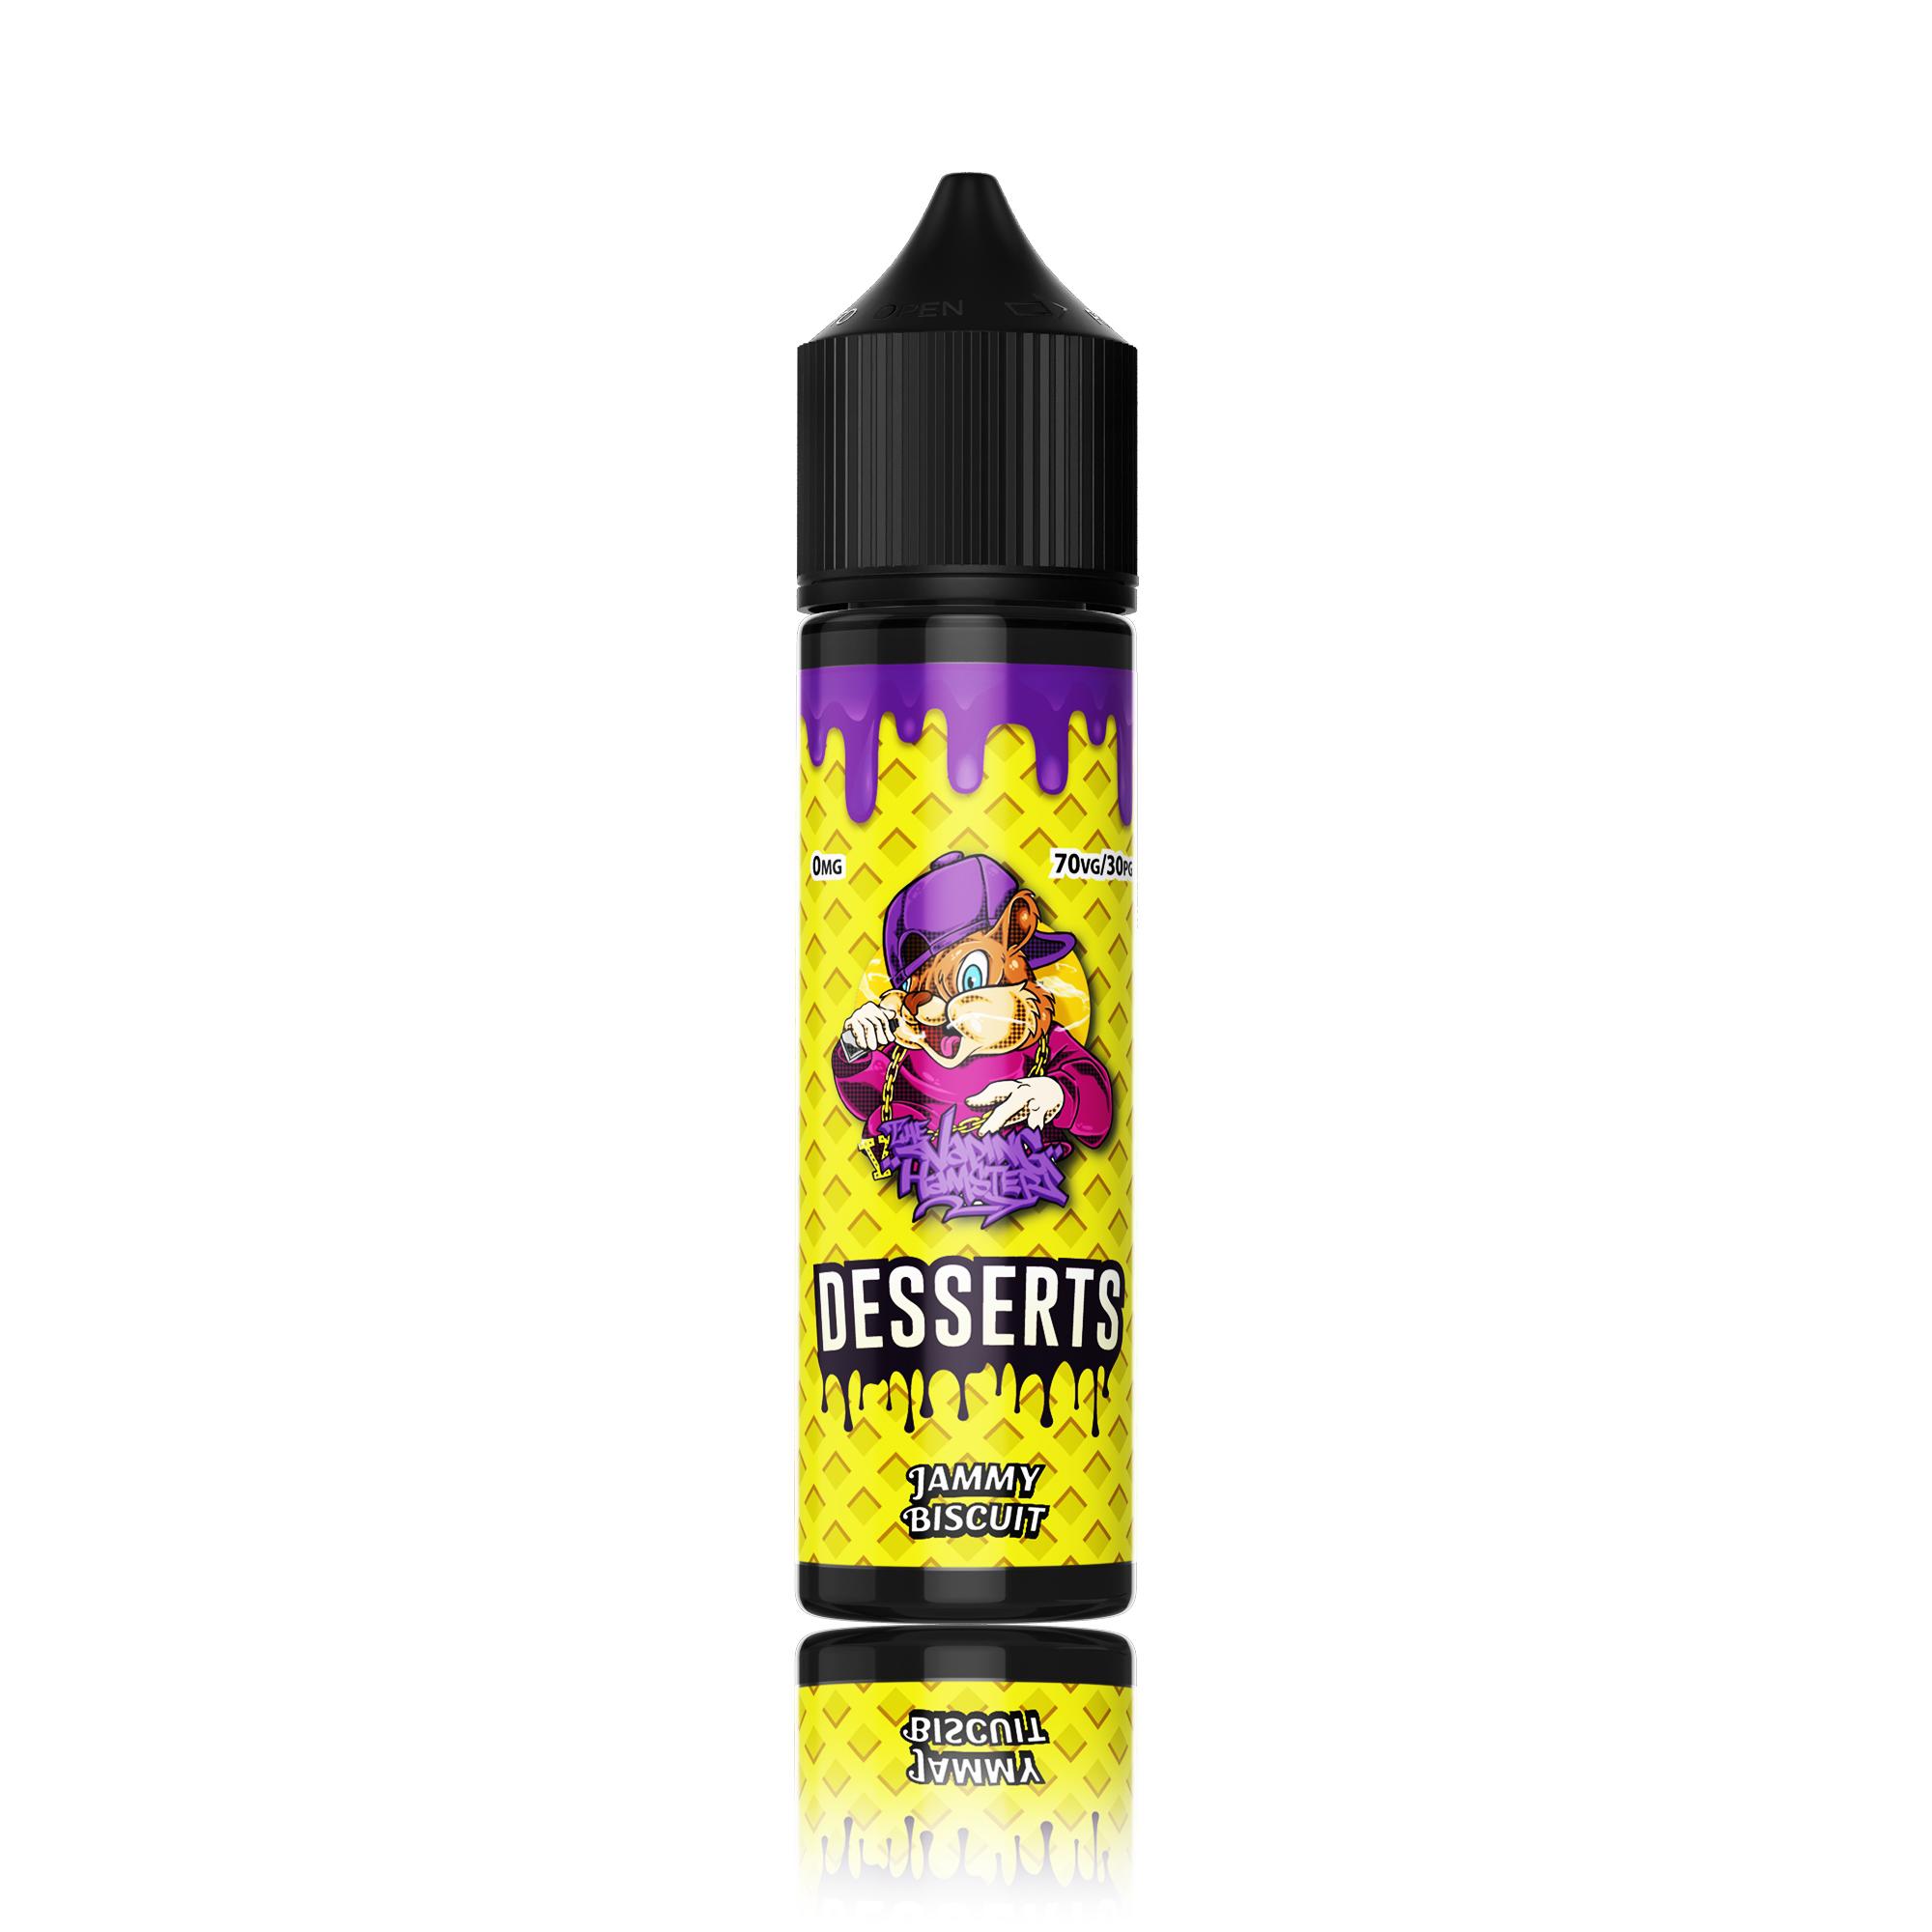 Jammy Biscuit by The Vaping Hamster